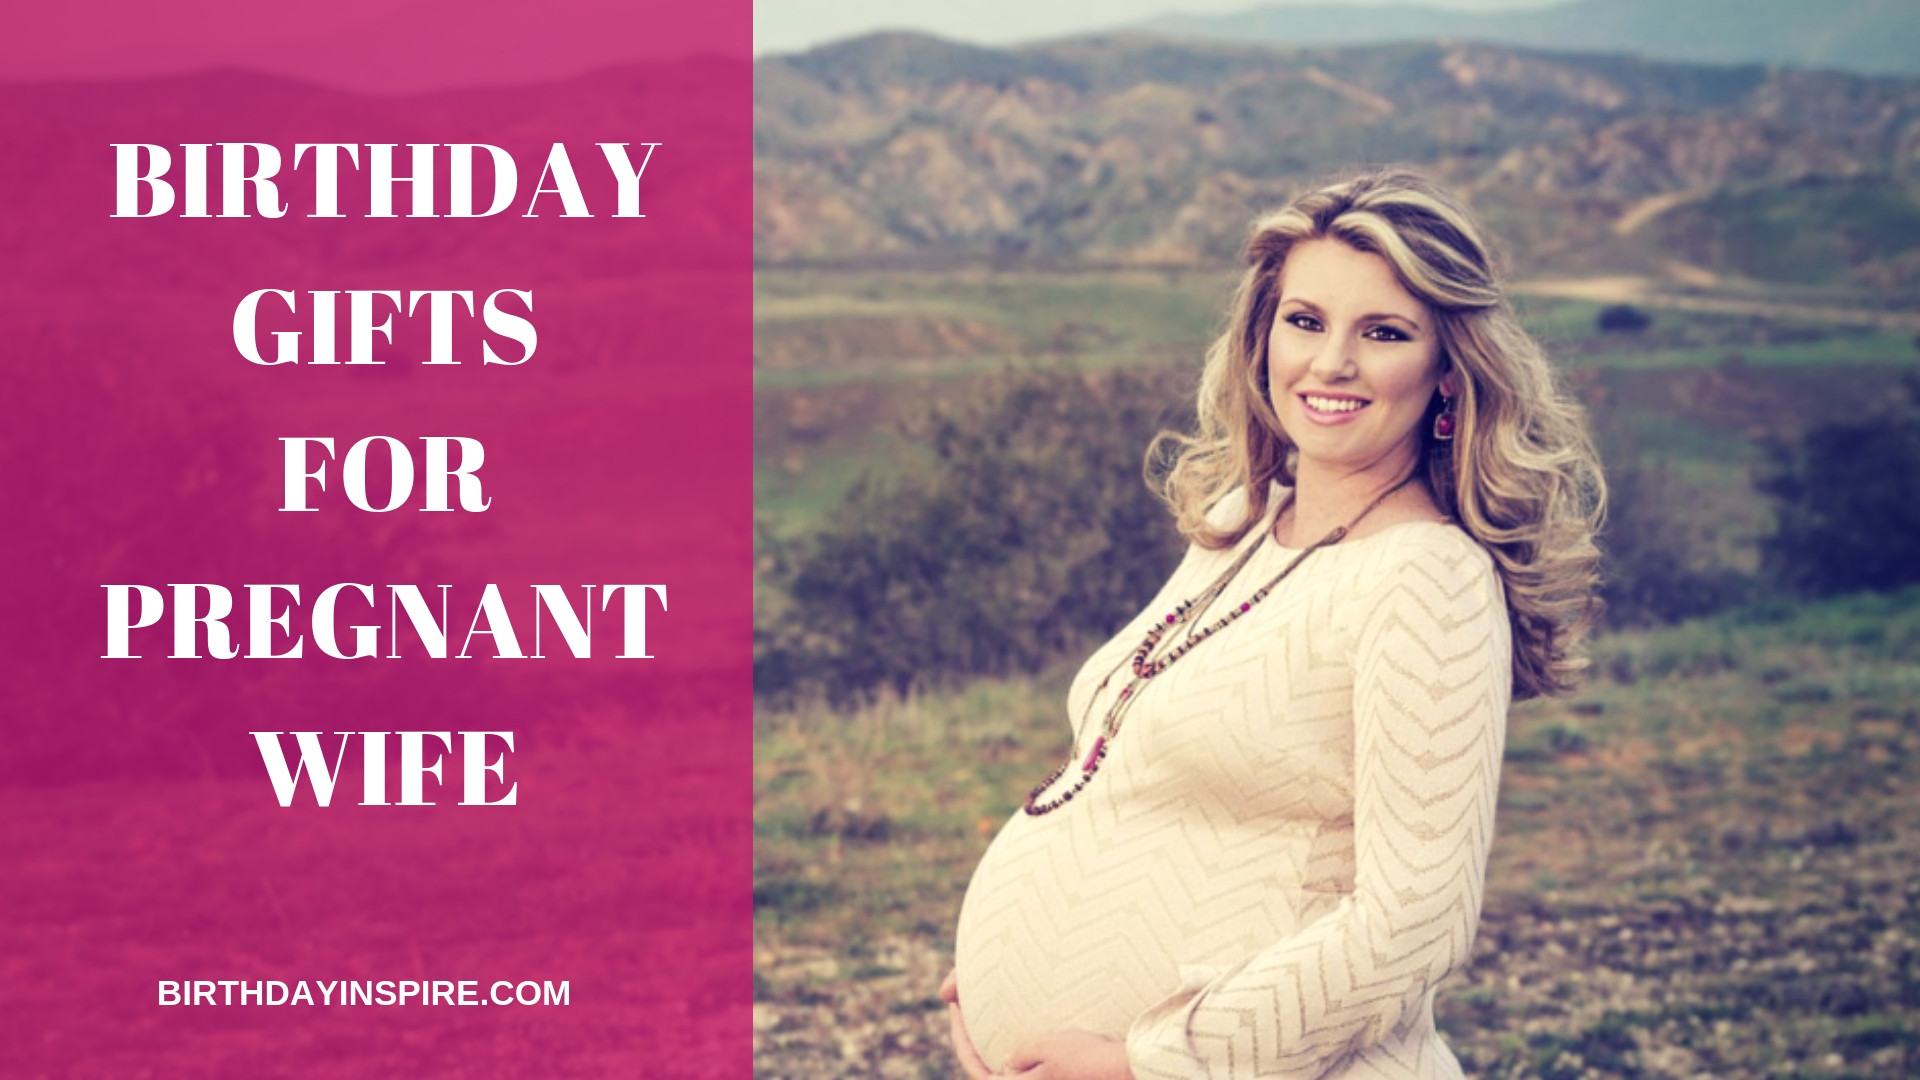 Birthday Gifts For Pregnant Wife
 25 Useful Birthday Gifts For Pregnant Women